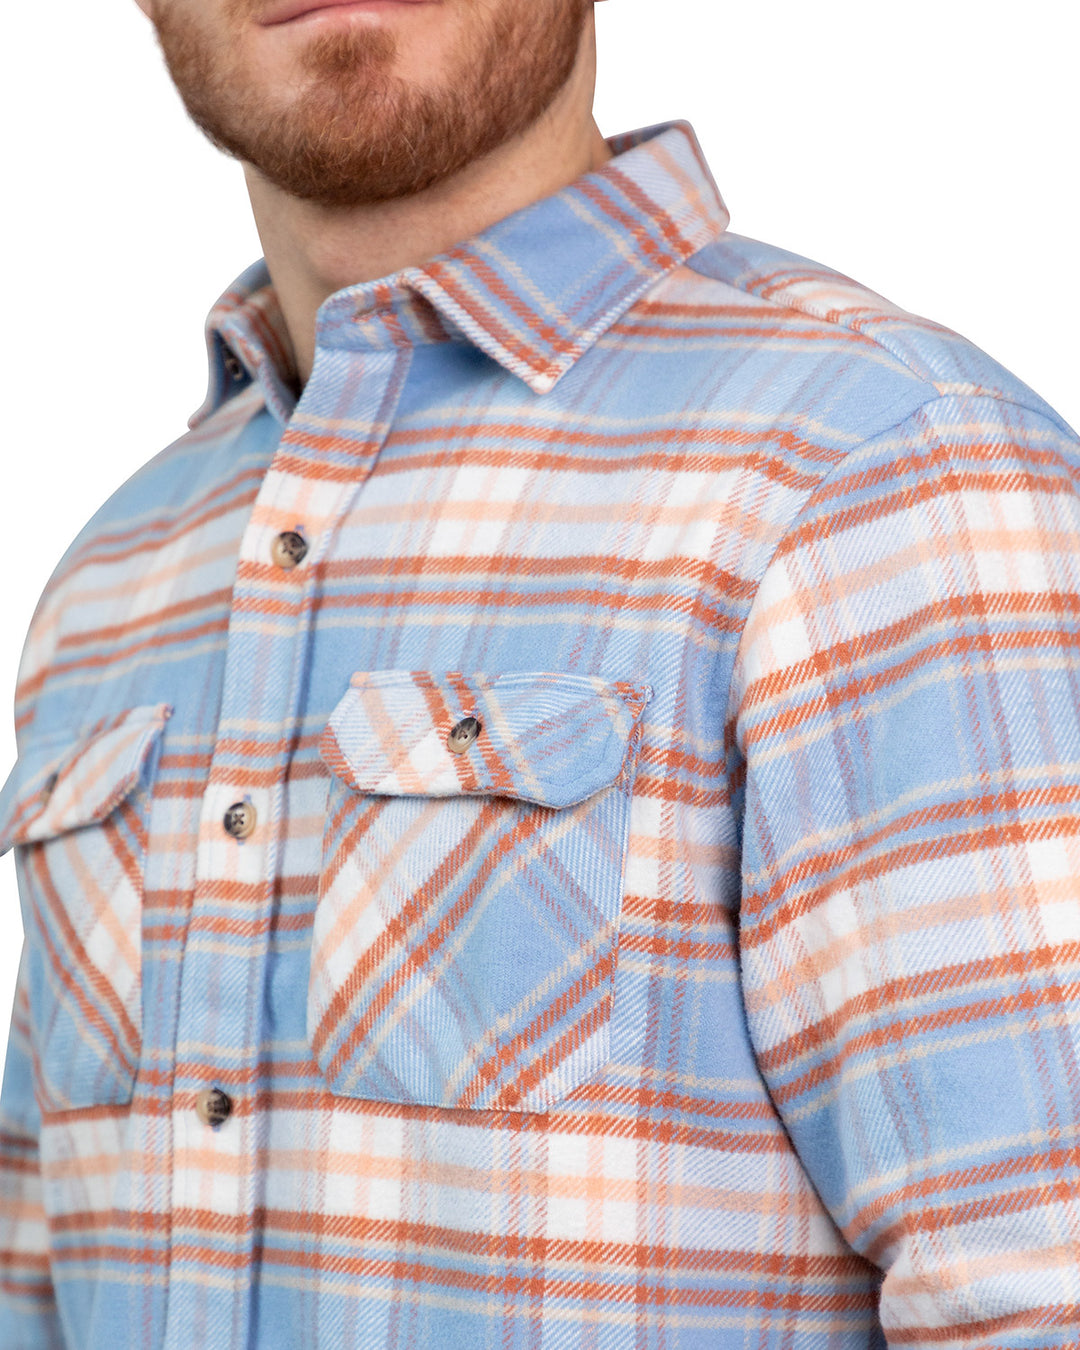 Grand Flannel Shirt for Men, 100% Cotton Heavyweight Flannel Shirt in Blue and Orange Plaid